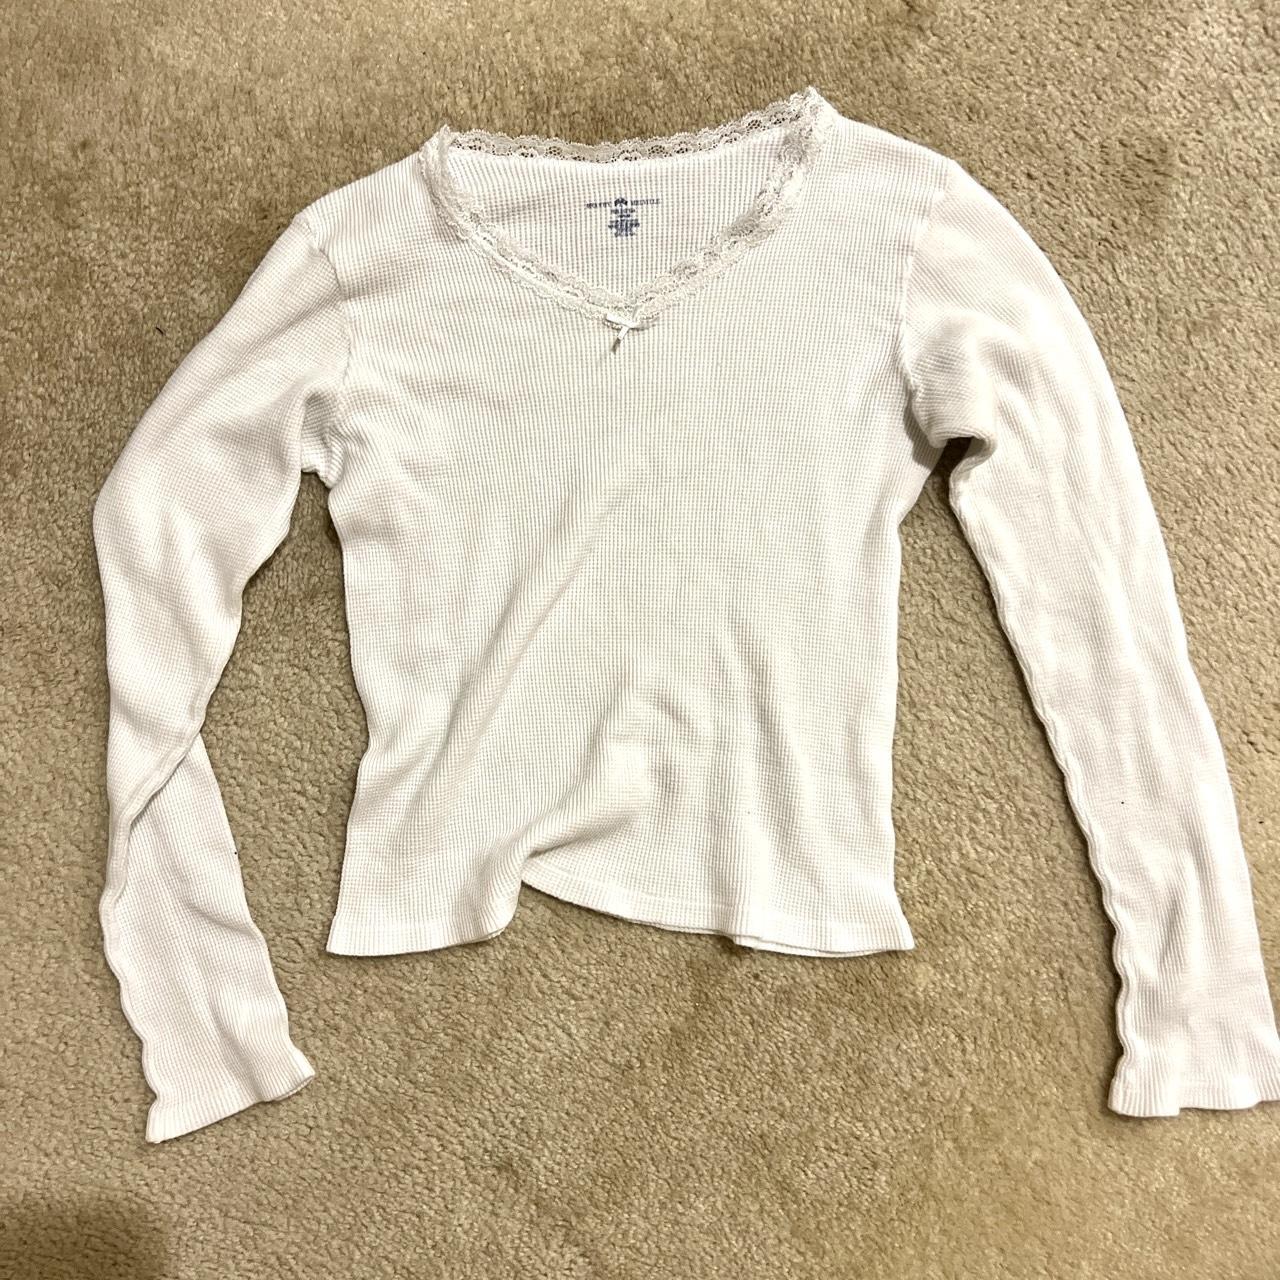 brandy melville sonia basic top in white lace and - Depop